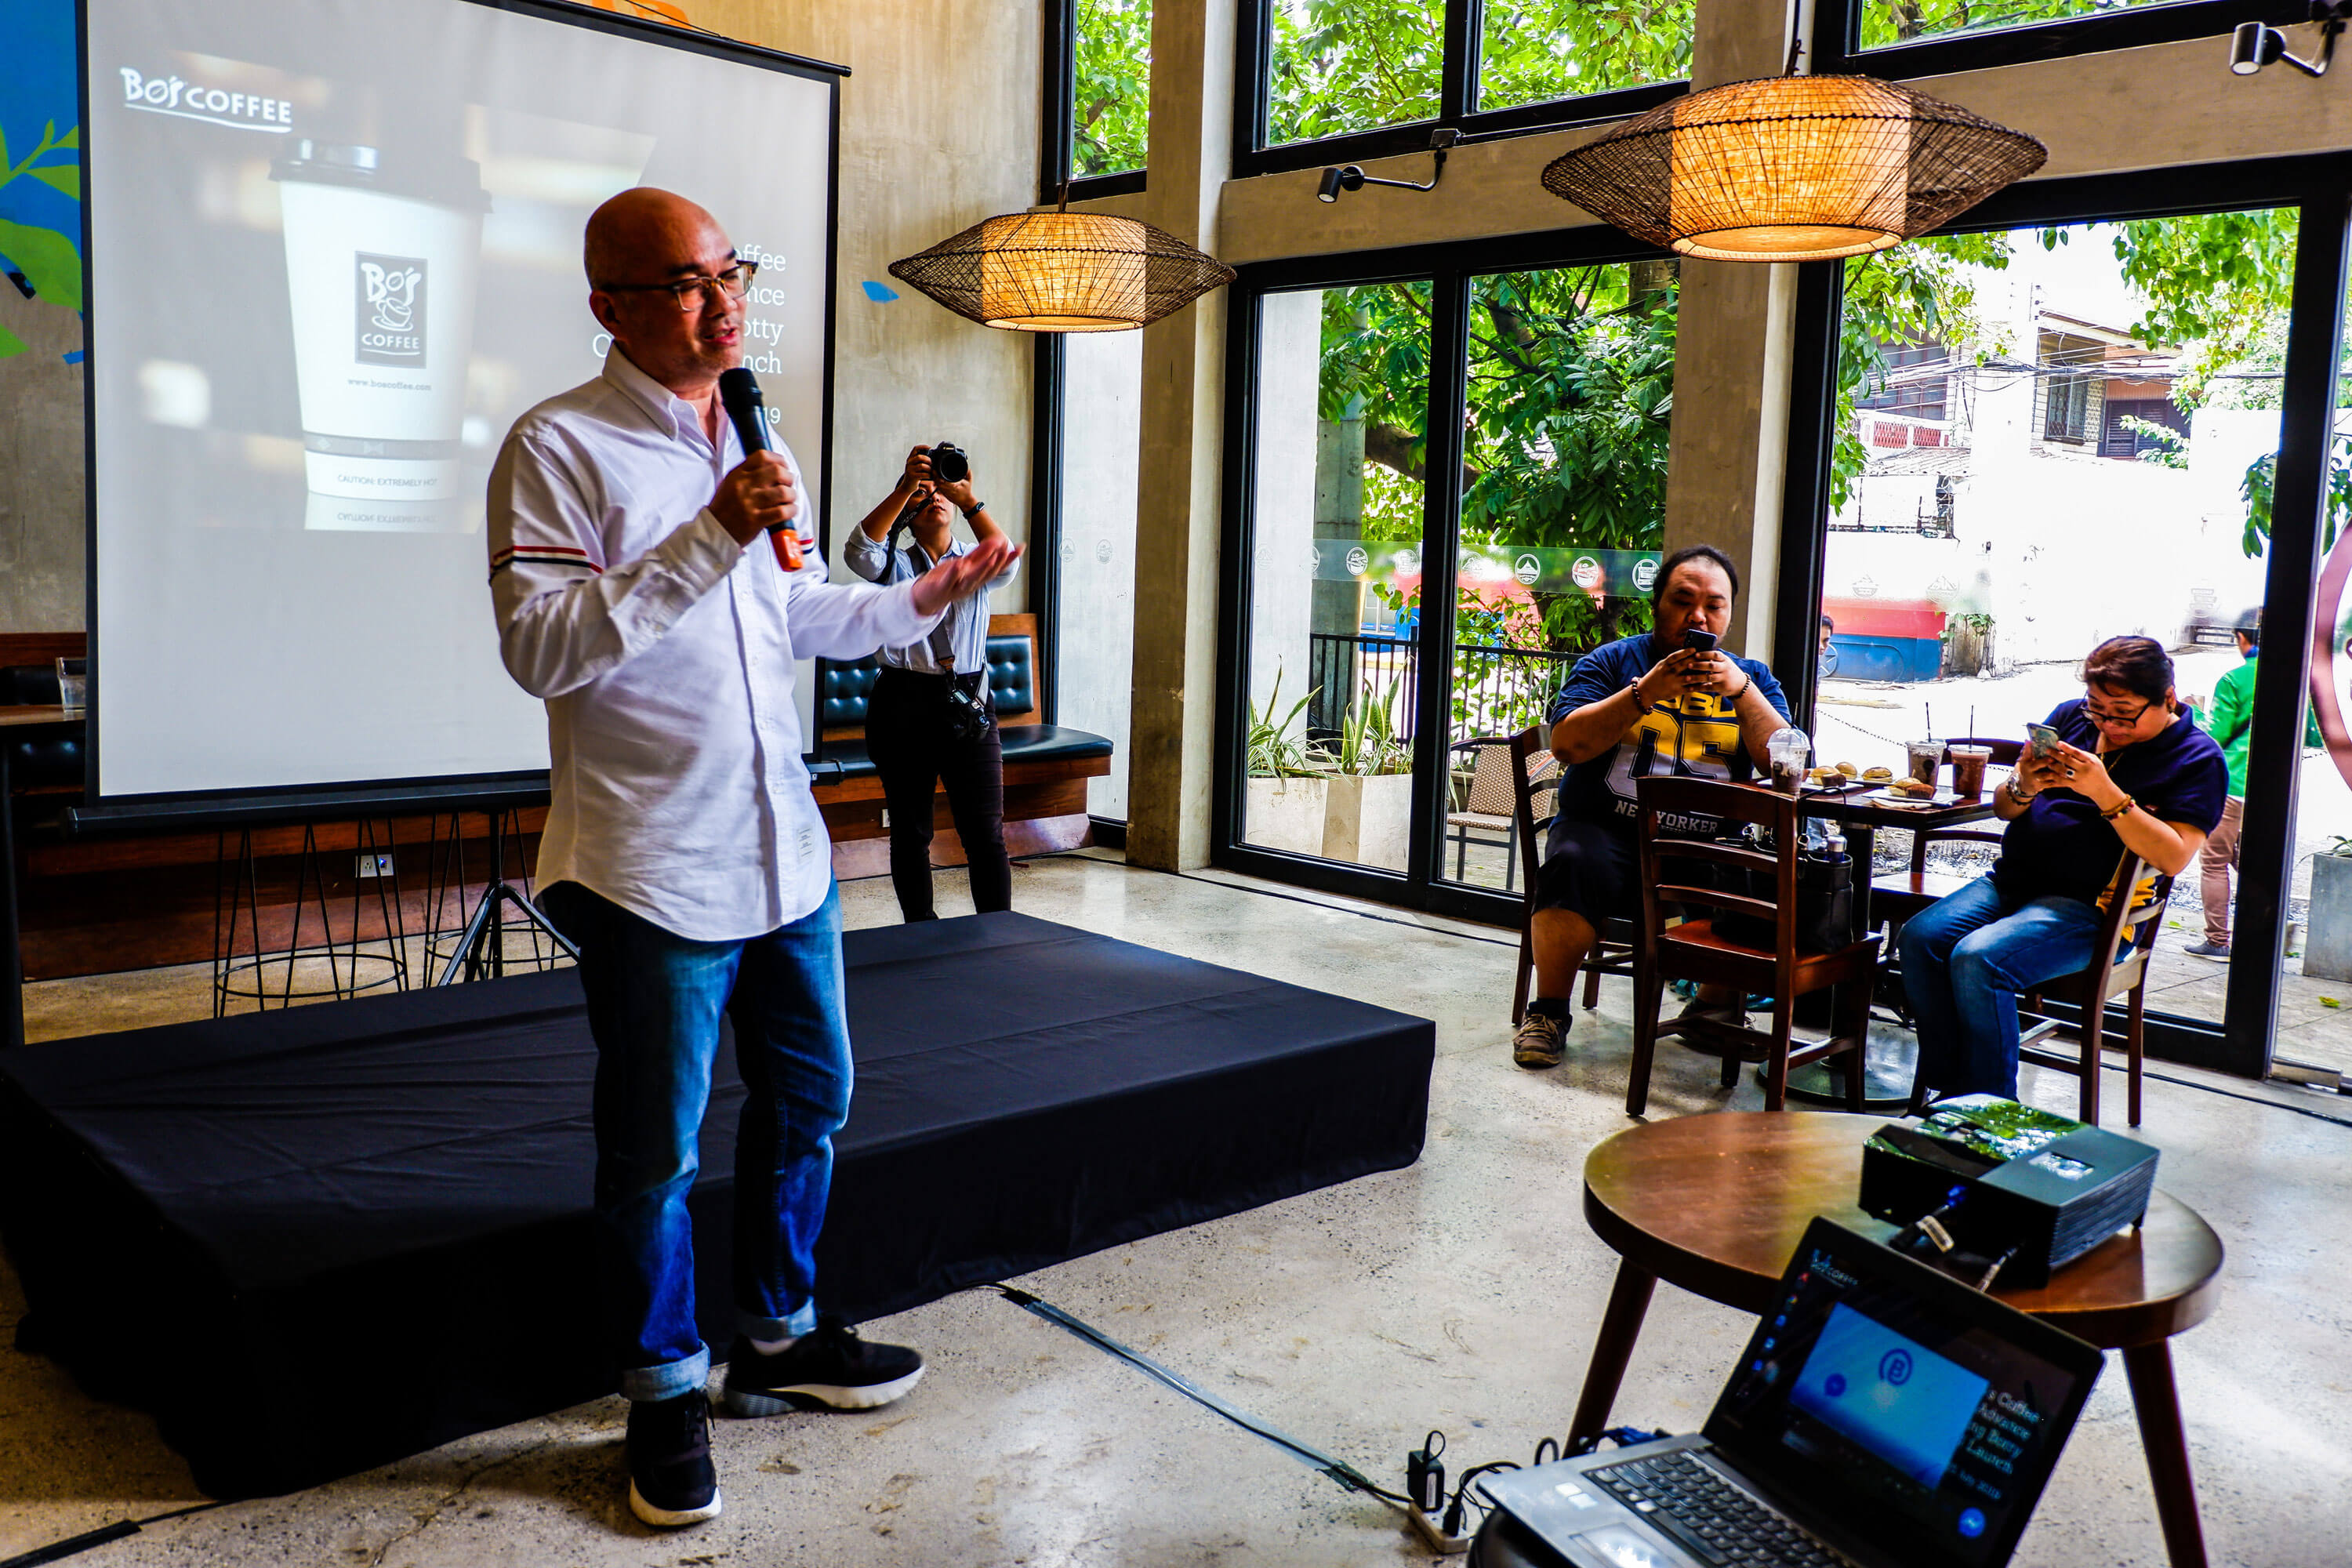 BETTER EXPERIENCE. Bo’s Coffee founder Steve Benitez says they deployed Facebook Messenger chatbot to enhance the experience of their customers.